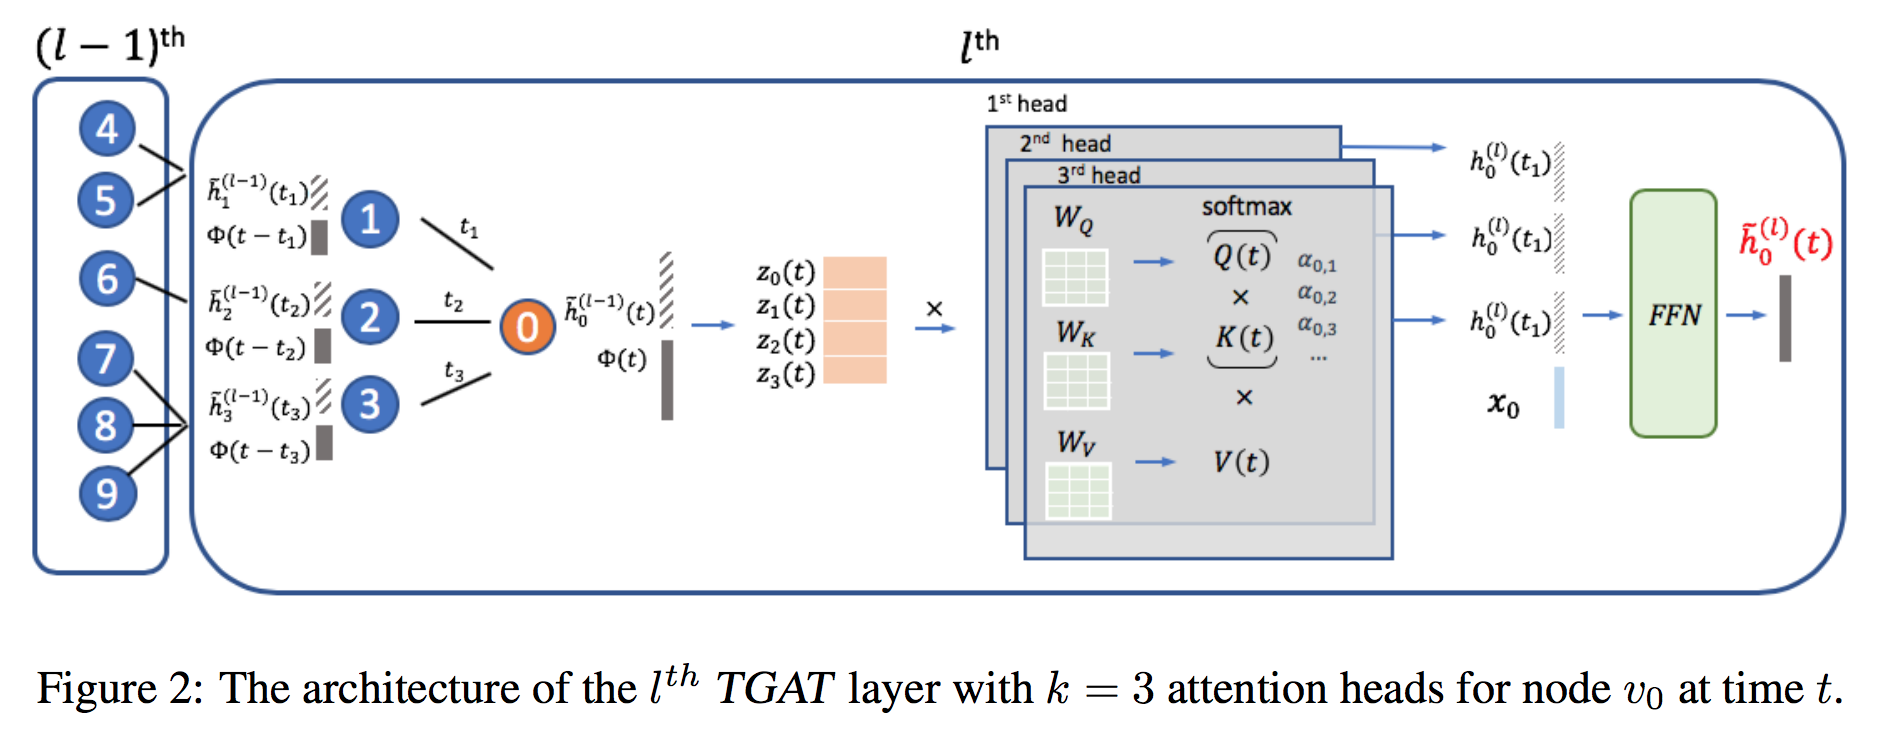 inductive representation learning on temporal graph